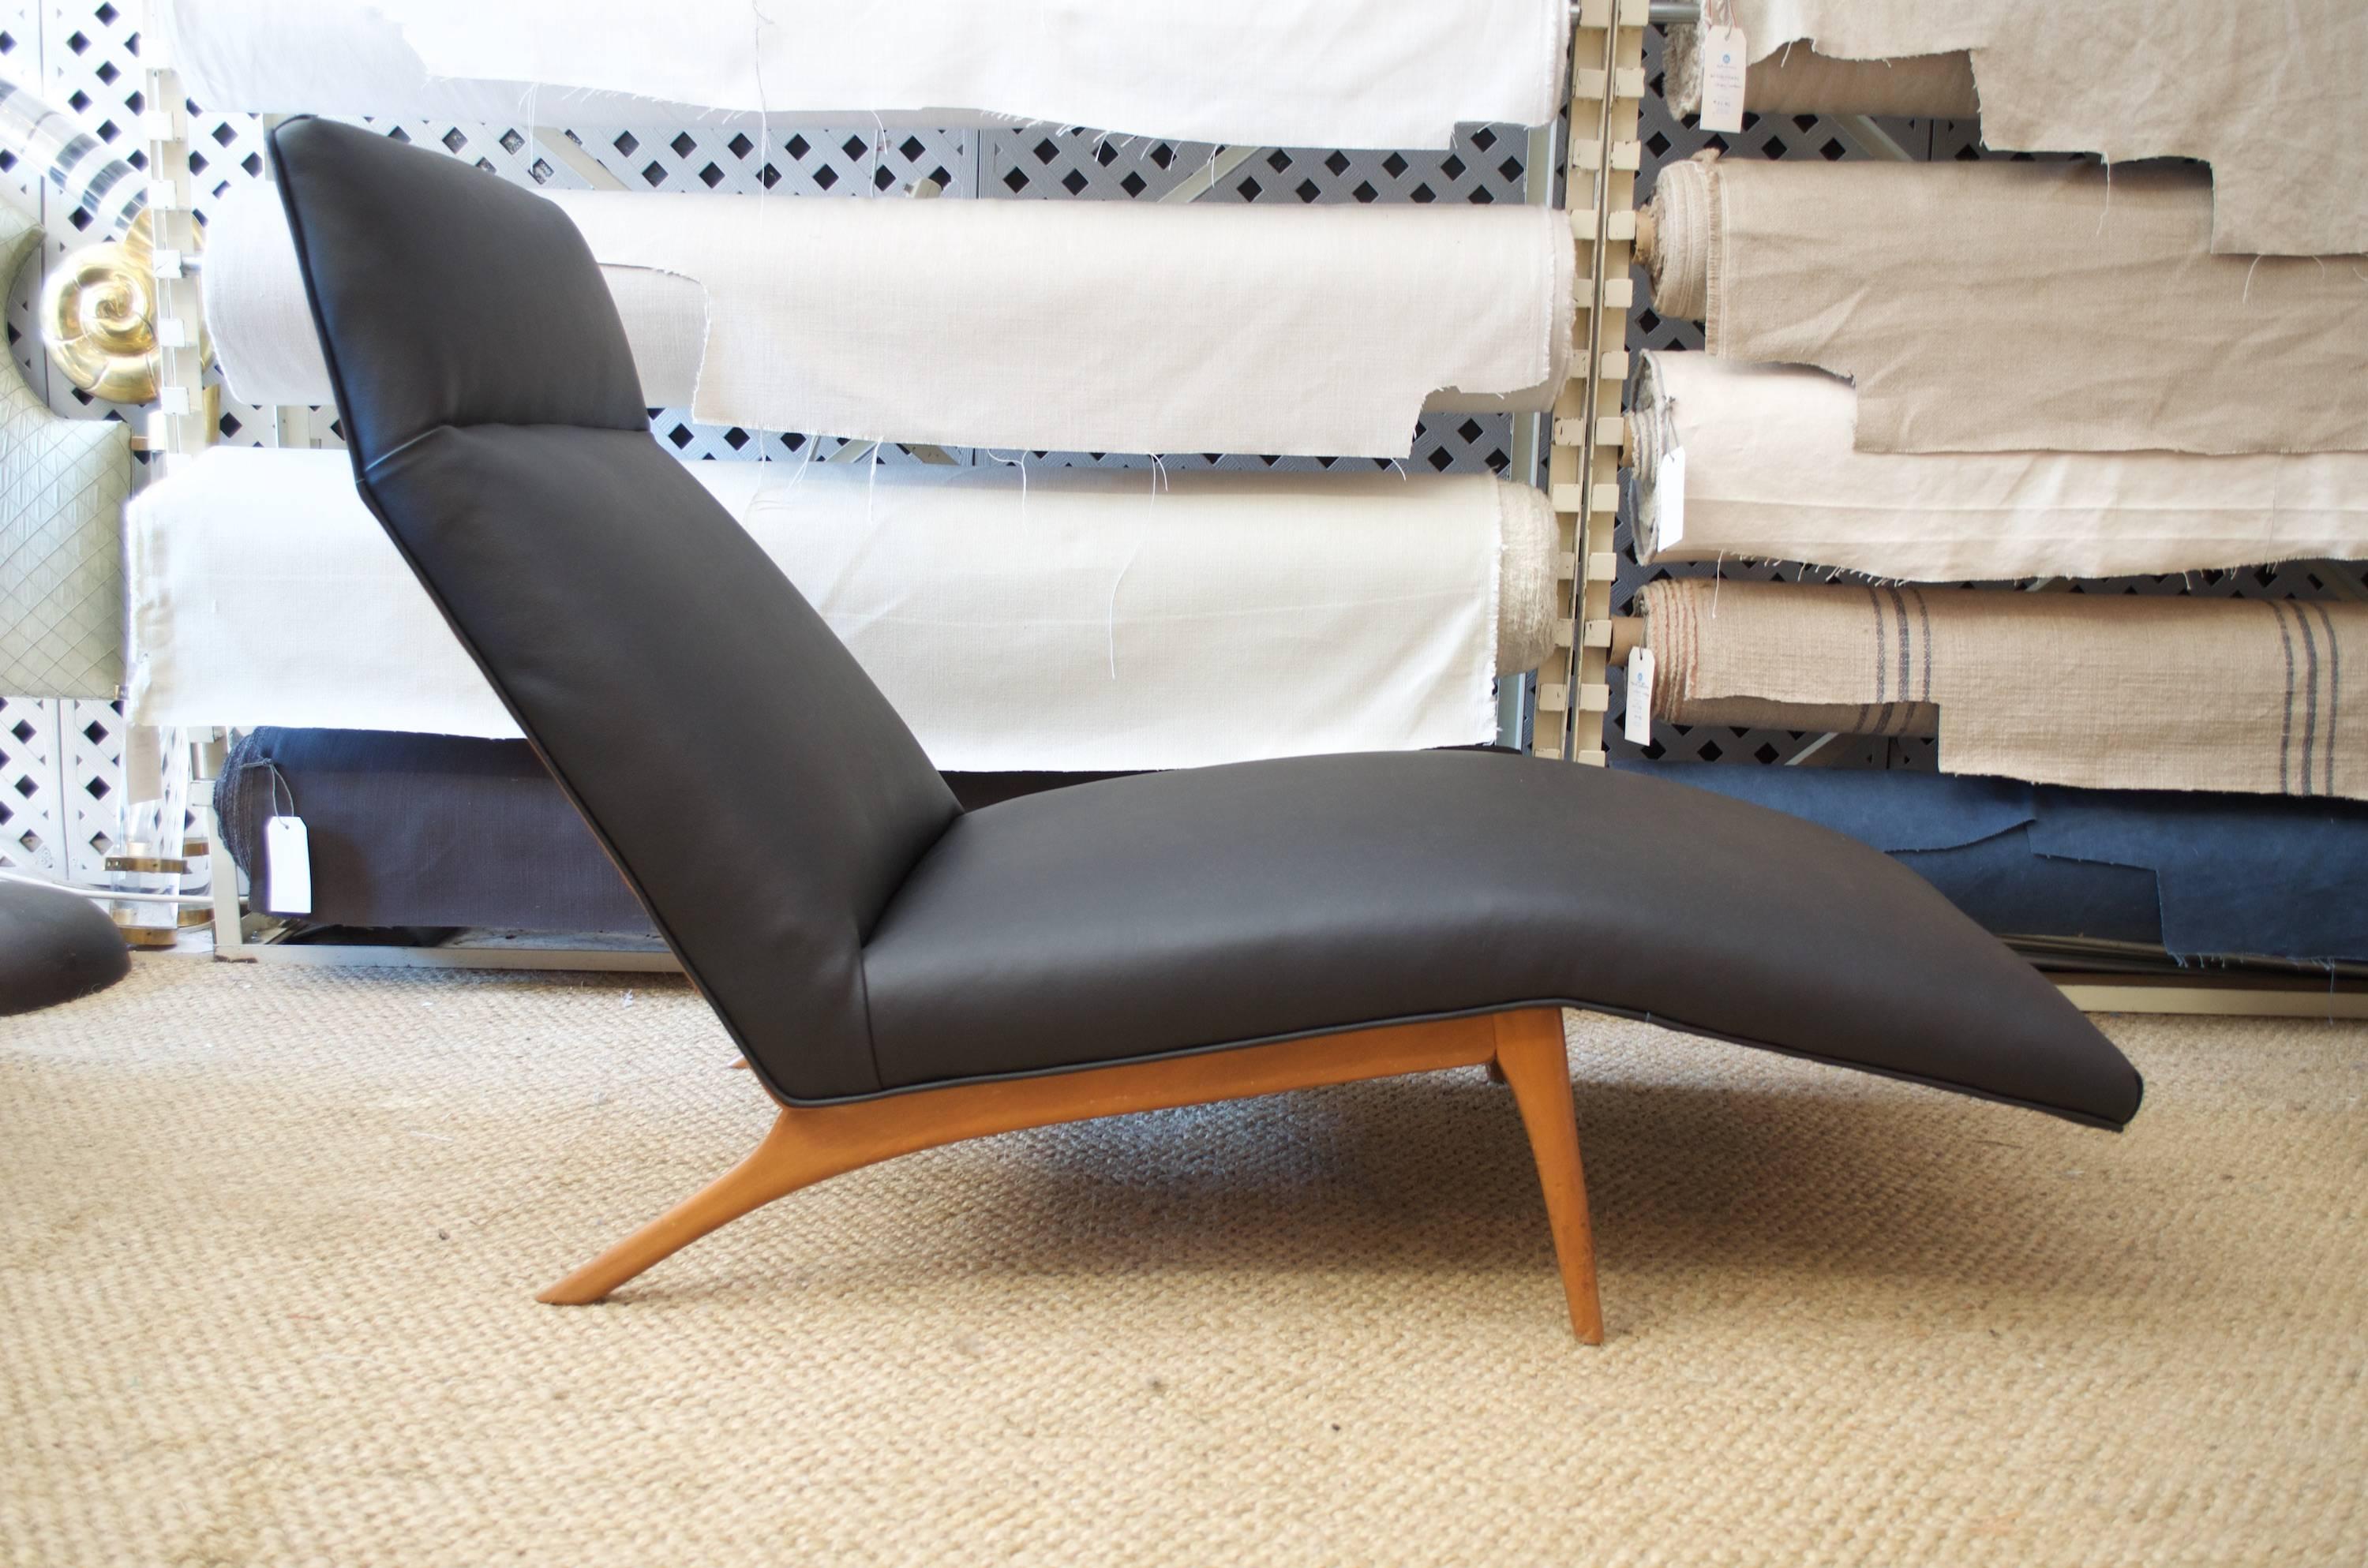 Rarely seen lounge chair designed by Poul Jensen for Selig. Phenomenally executed ergonomic design accommodates every body type. This piece has been newly upholstered using high grade contrasting leathers; a rich black on the front and an elegant